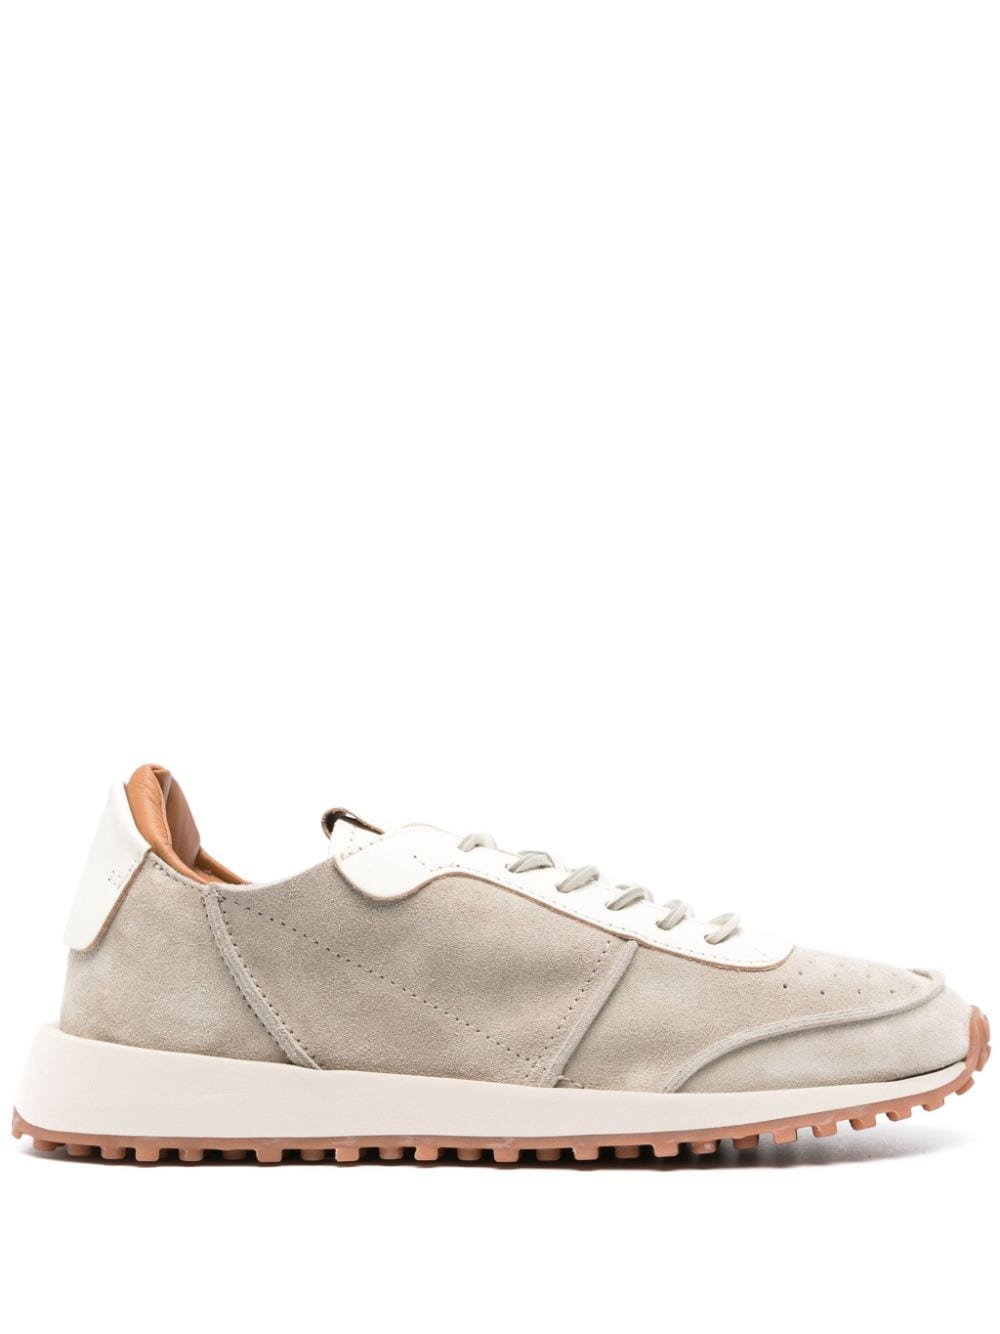 Buttero lace-up suede sneakers - Grey von Buttero